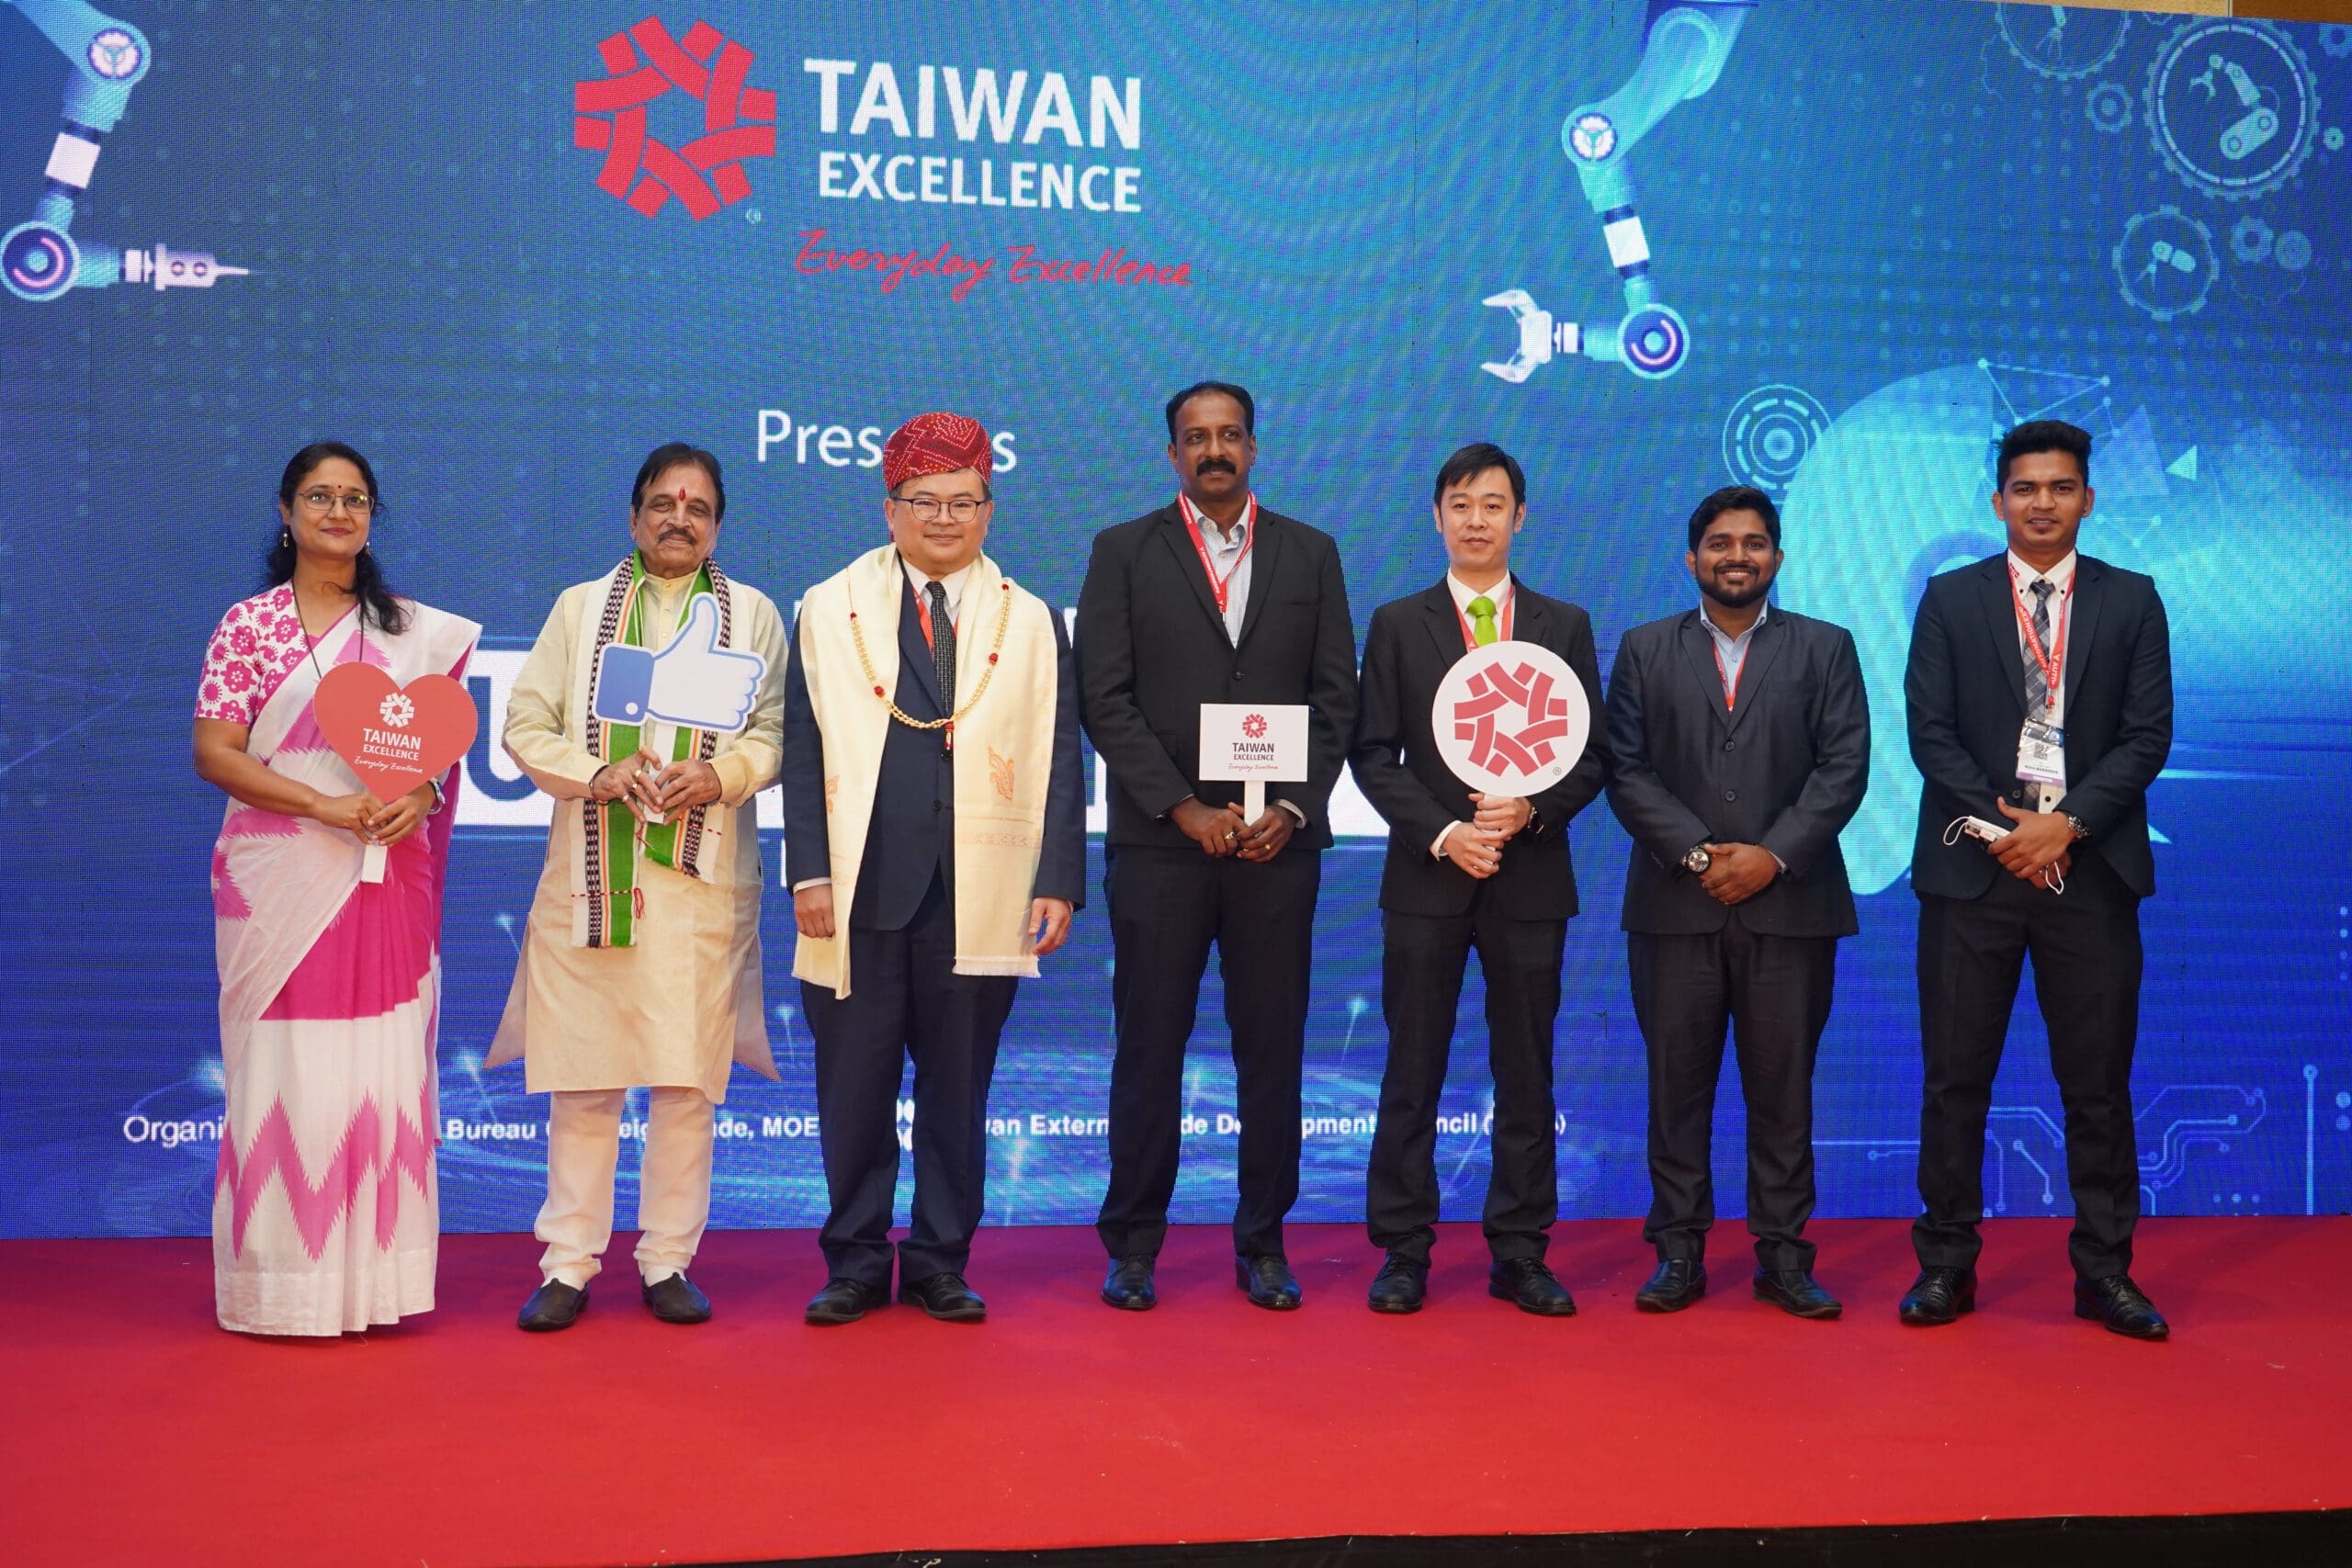 TAIWAN EXCELLENCE IMPRESSES MANY  AT AUTOMATION EXPO 2022 WITH  BEST-IN-CLASS TECHNOLOGY & PRODUCTS